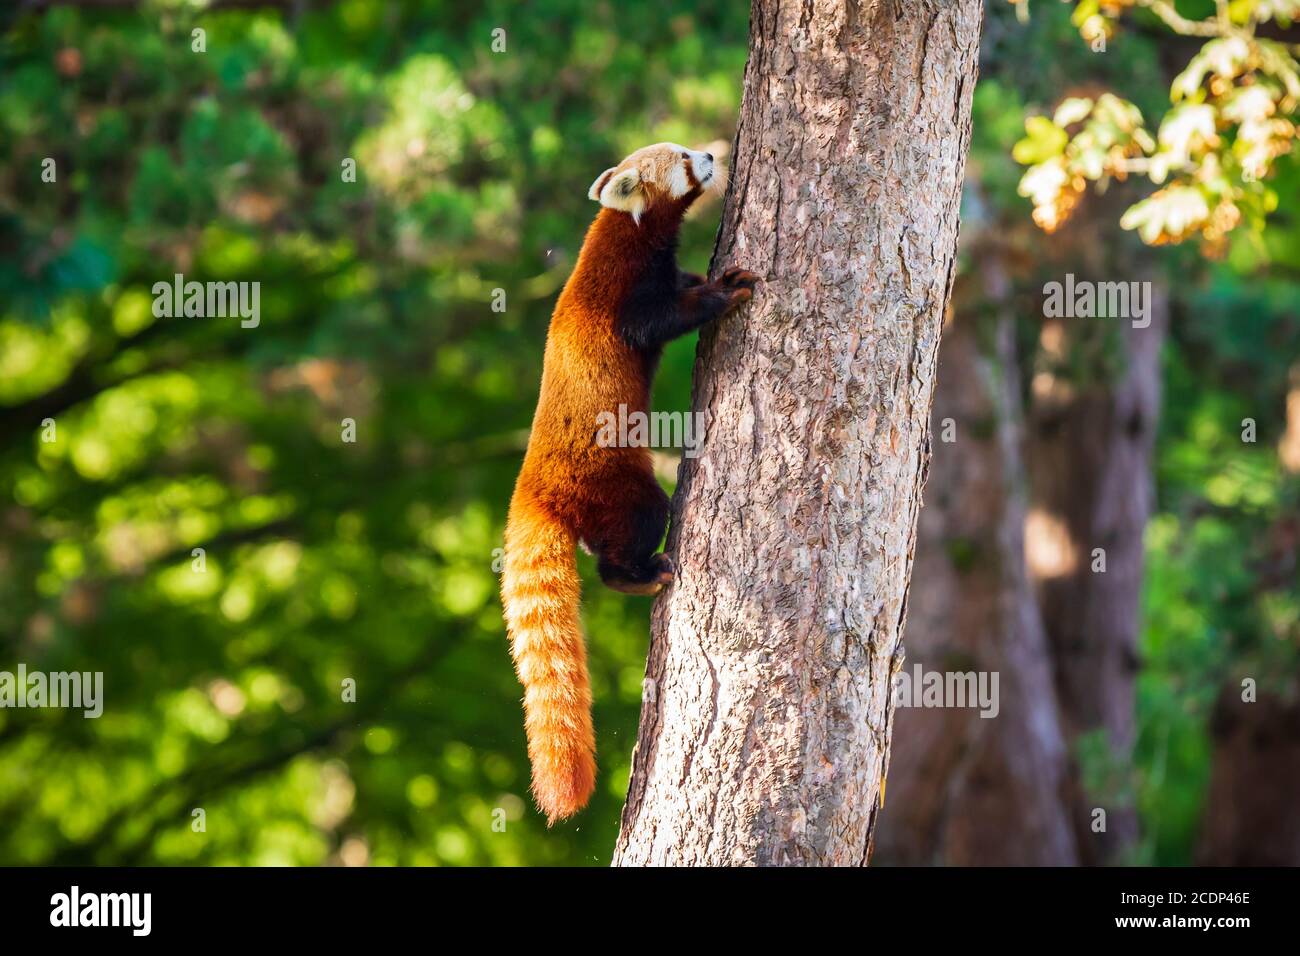 Cute Little red panda resting in a tree. This is a small arboreal mammal native to the eastern Himalayas and southwestern China that has been classifi Stock Photo